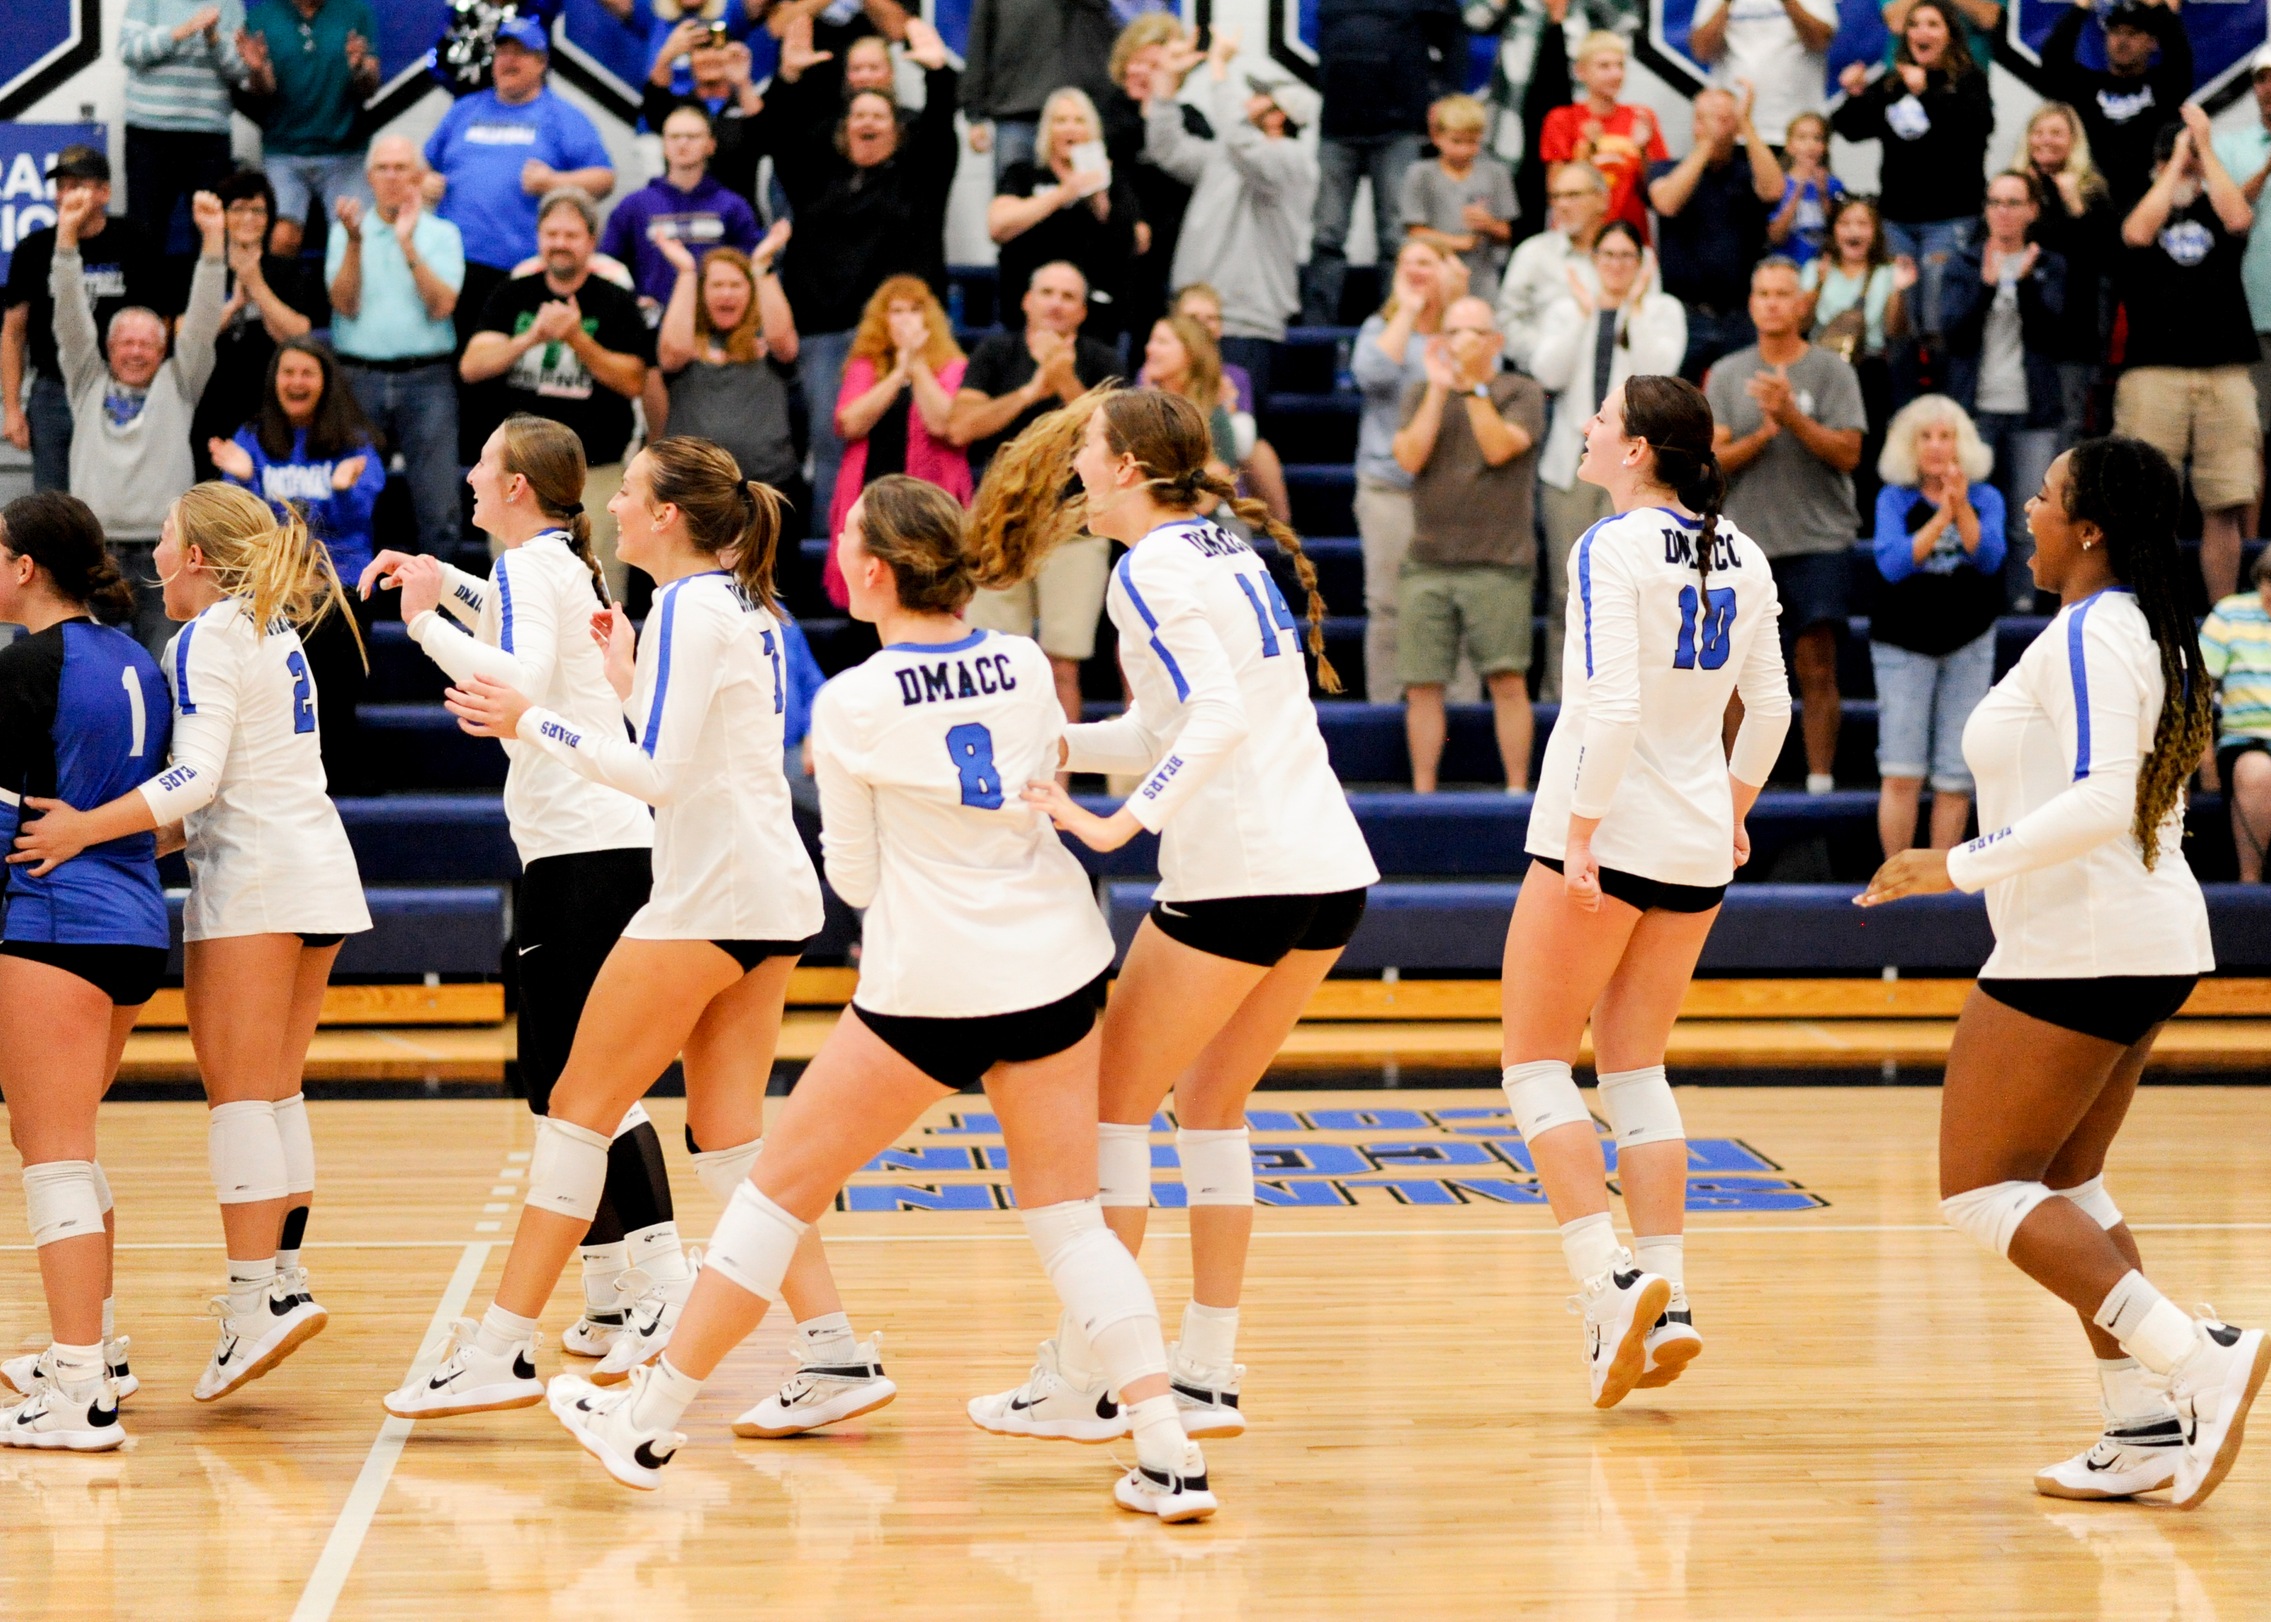 DMACC volleyball team sweeps ECC to clinch a share of the ICCAC conference championship